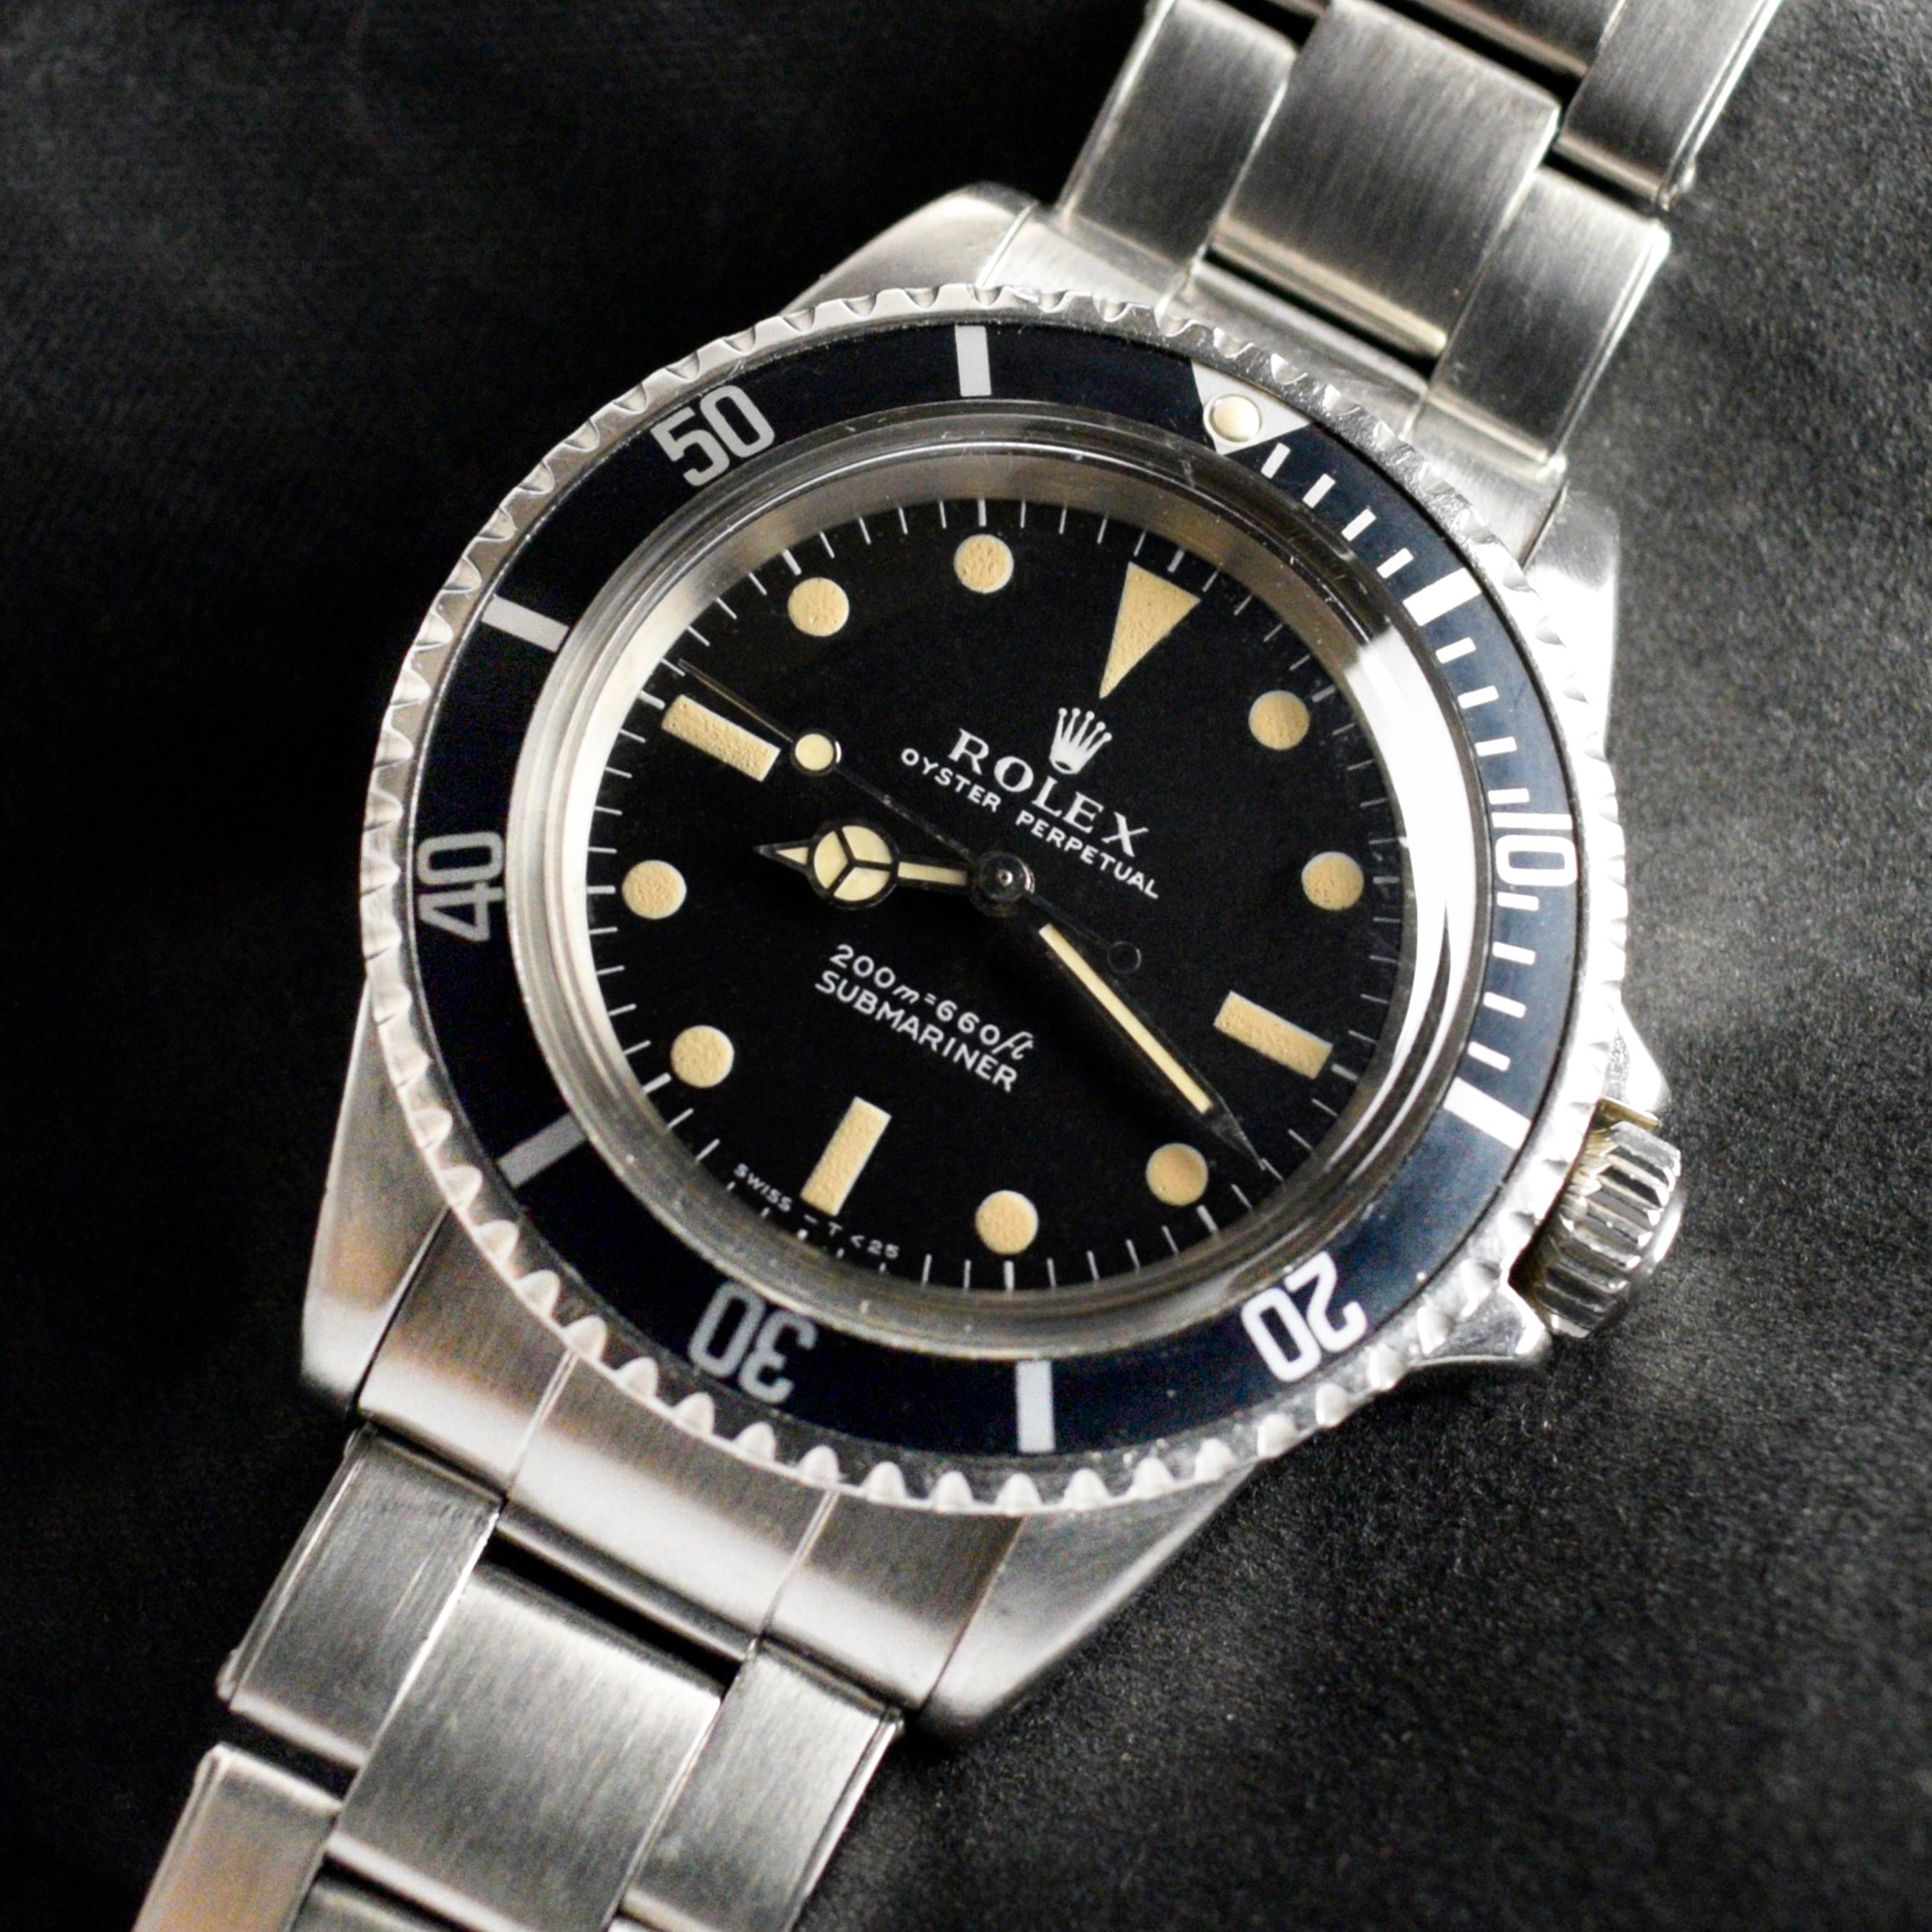 Brand: Vintage Rolex
Model: 5513
Year: 1967
Serial number: 17xxxxx
Reference: C03425; C03223

Case: Show sign of wear with slight polish from previous; inner case back stamped 5513 IV.67

Dial: Excellent Aged Condition Matte Dial where the lumes